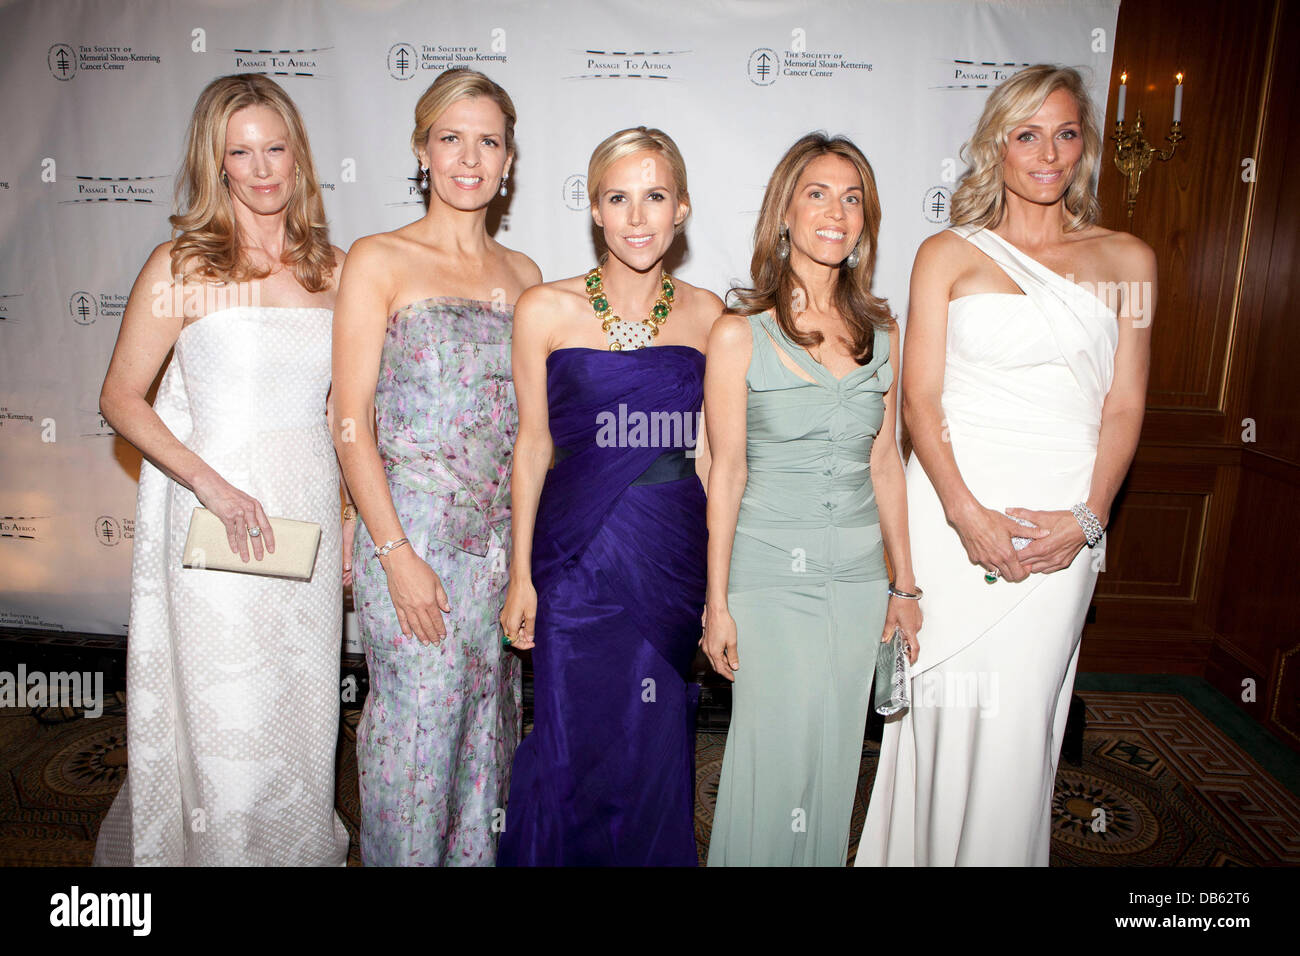 Shelly Carr, Heather Leeds, Tory Burch, Caryn Zucker, Jamie Tisch attend the Society of Memorial Sloan-Kettering Cancer Center's 2011 Spring Ball at The Pierre Hotel New York City, USA - 04.05.11 Stock Photo